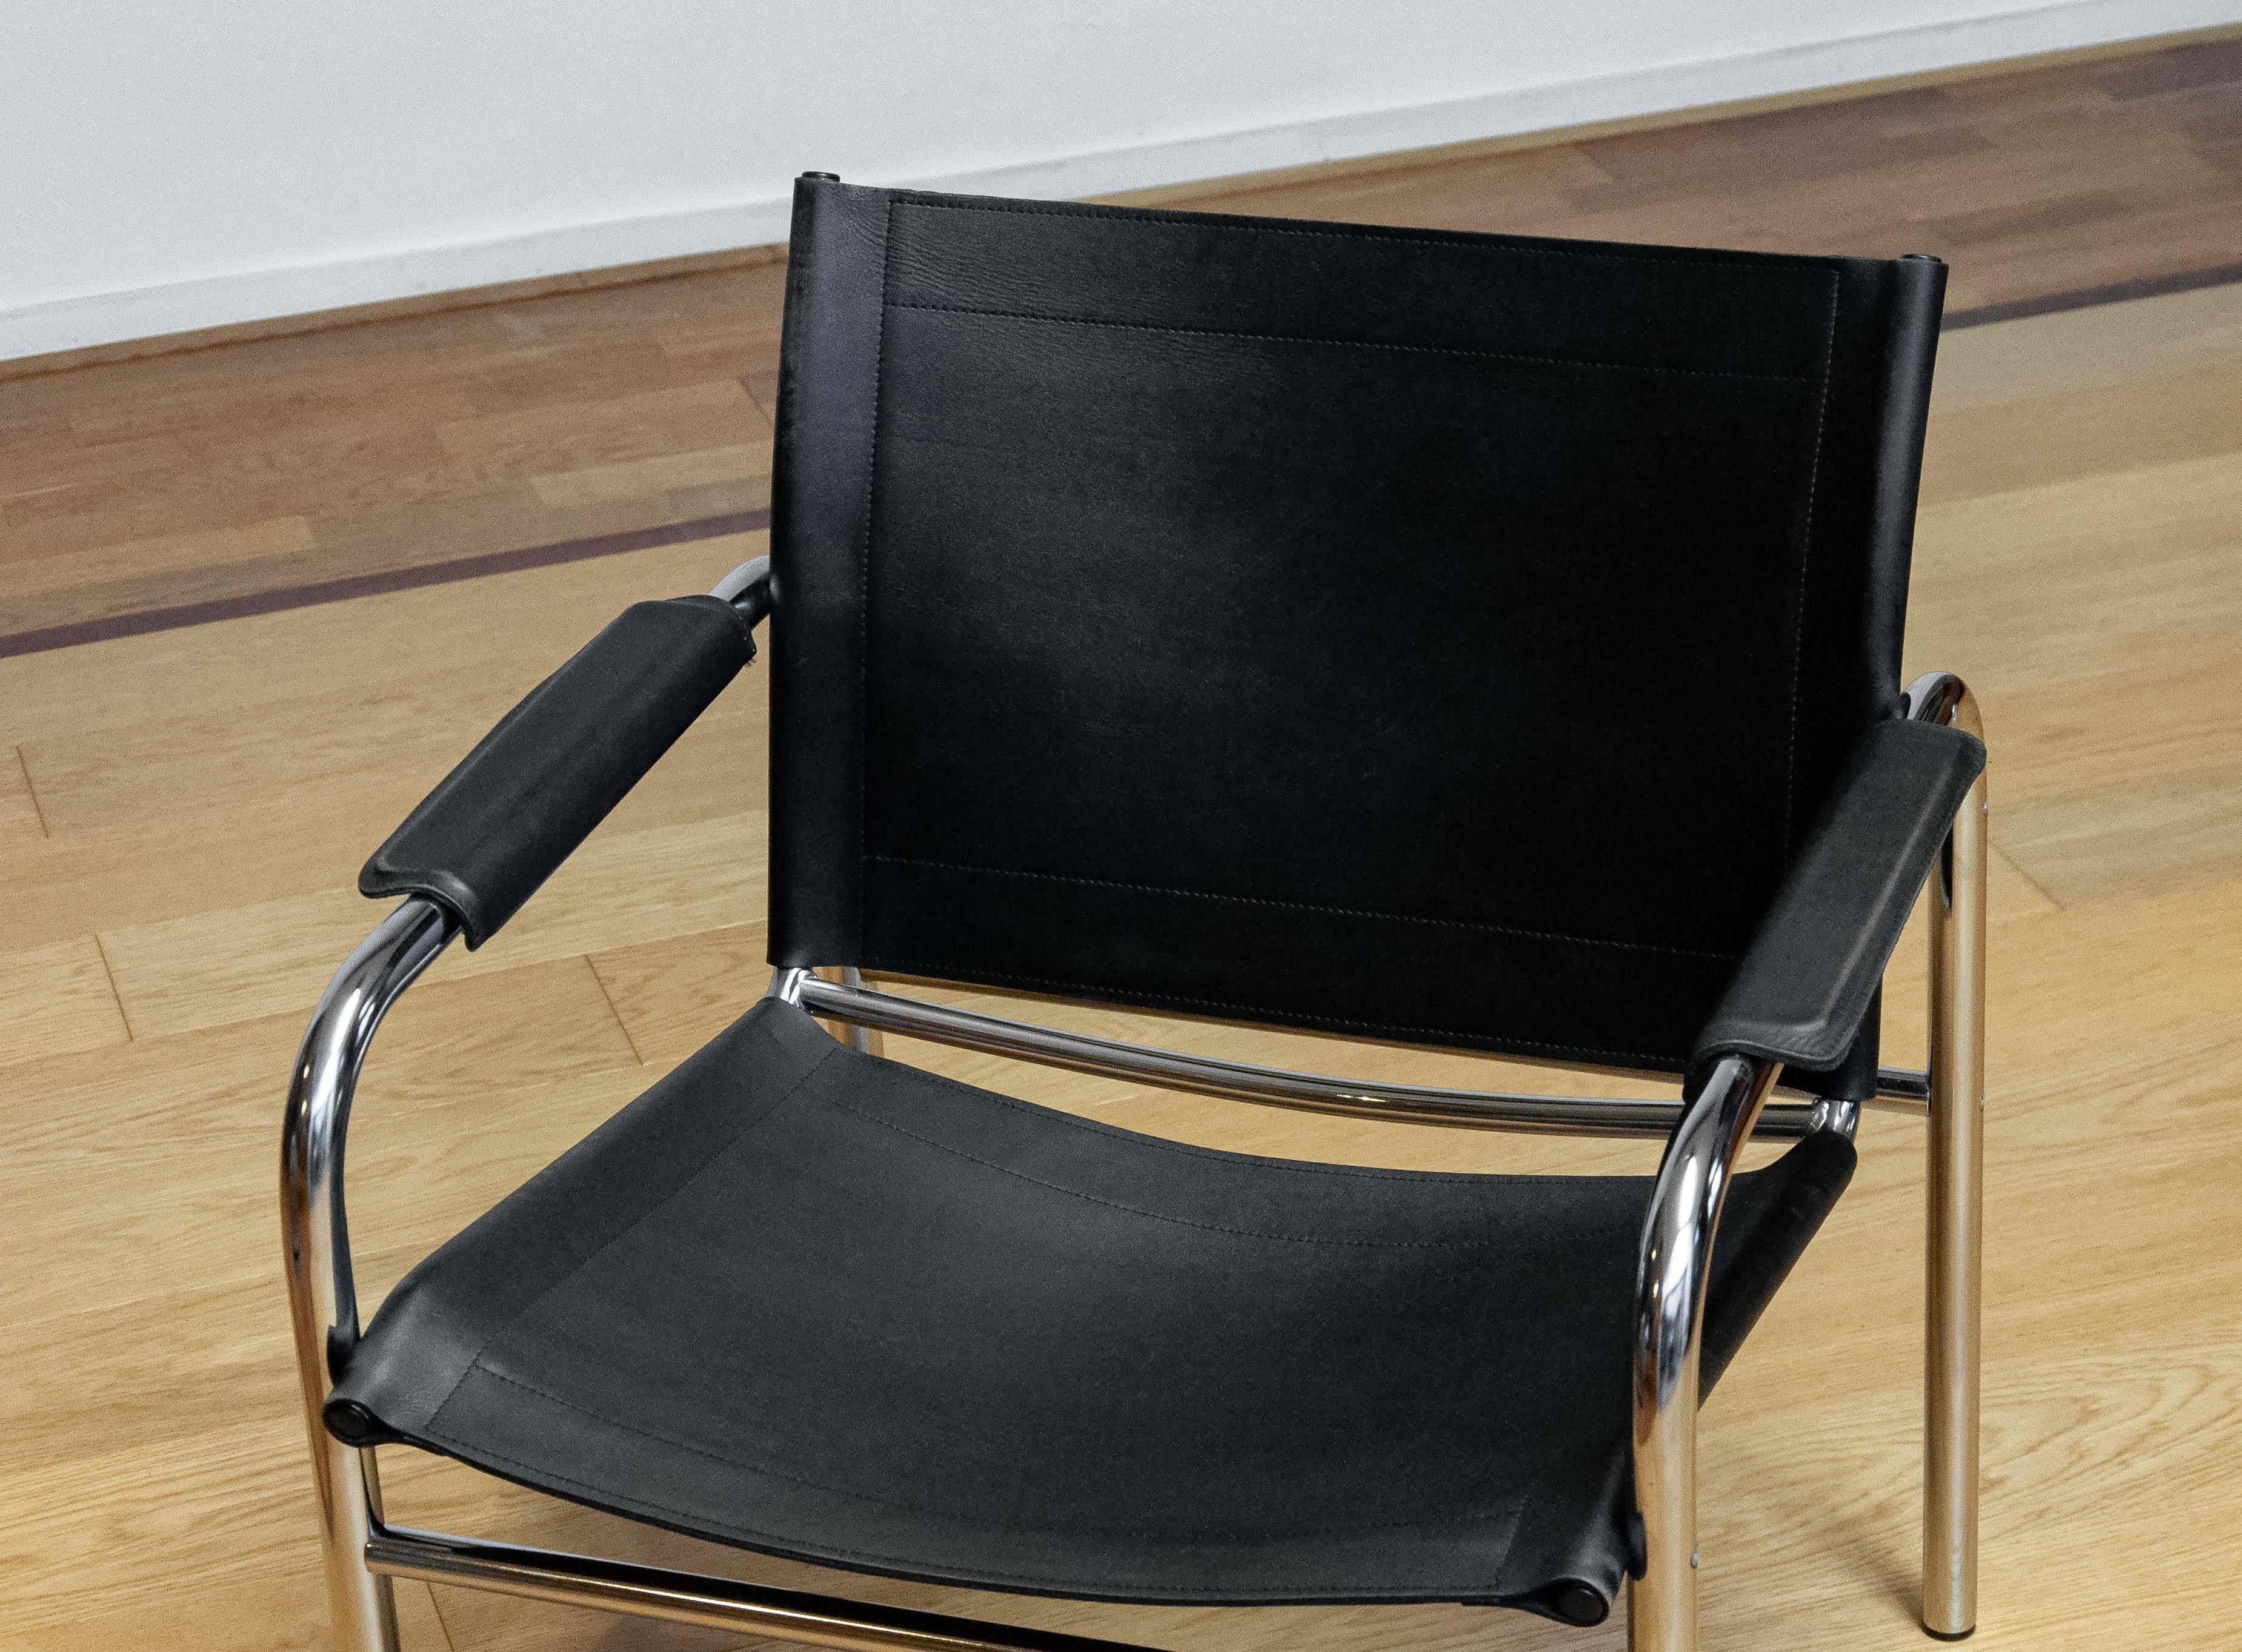 Black leather armchair, model Klinte, designed by Tord Bjorklund, for Ikea in Sweden in the 1970s. The chair has a thick leather upholstery and a chrome steel frame. 
This 'Klinte' chair is in allover very good condition.

Please note! Because